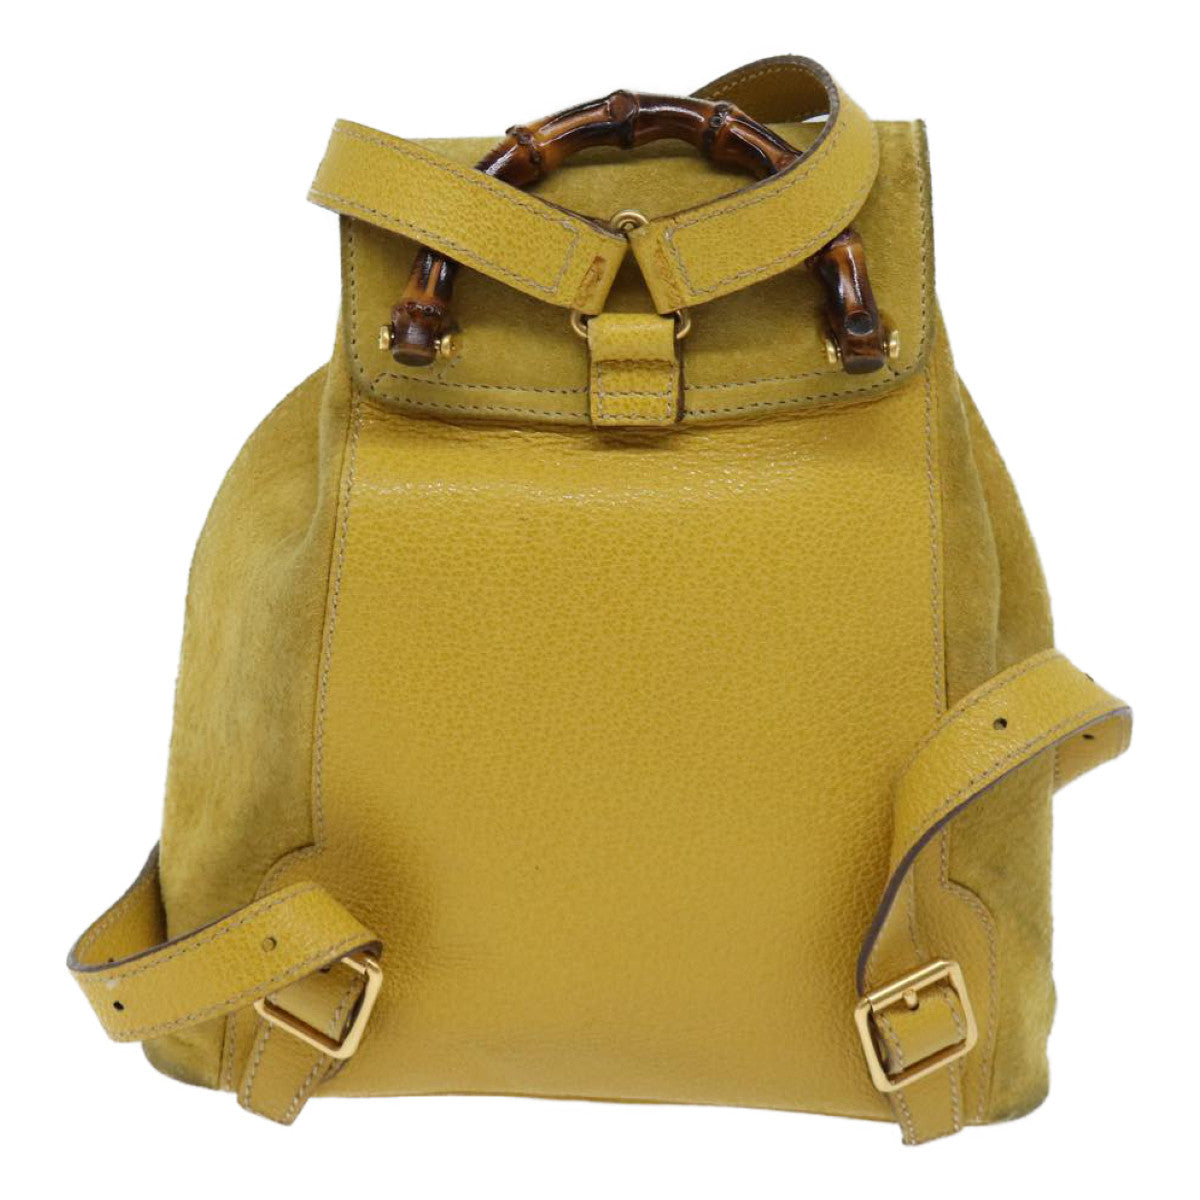 GUCCI Bamboo Backpack Suede Leather Yellow 003 1705 0030 Auth 69737 - 0